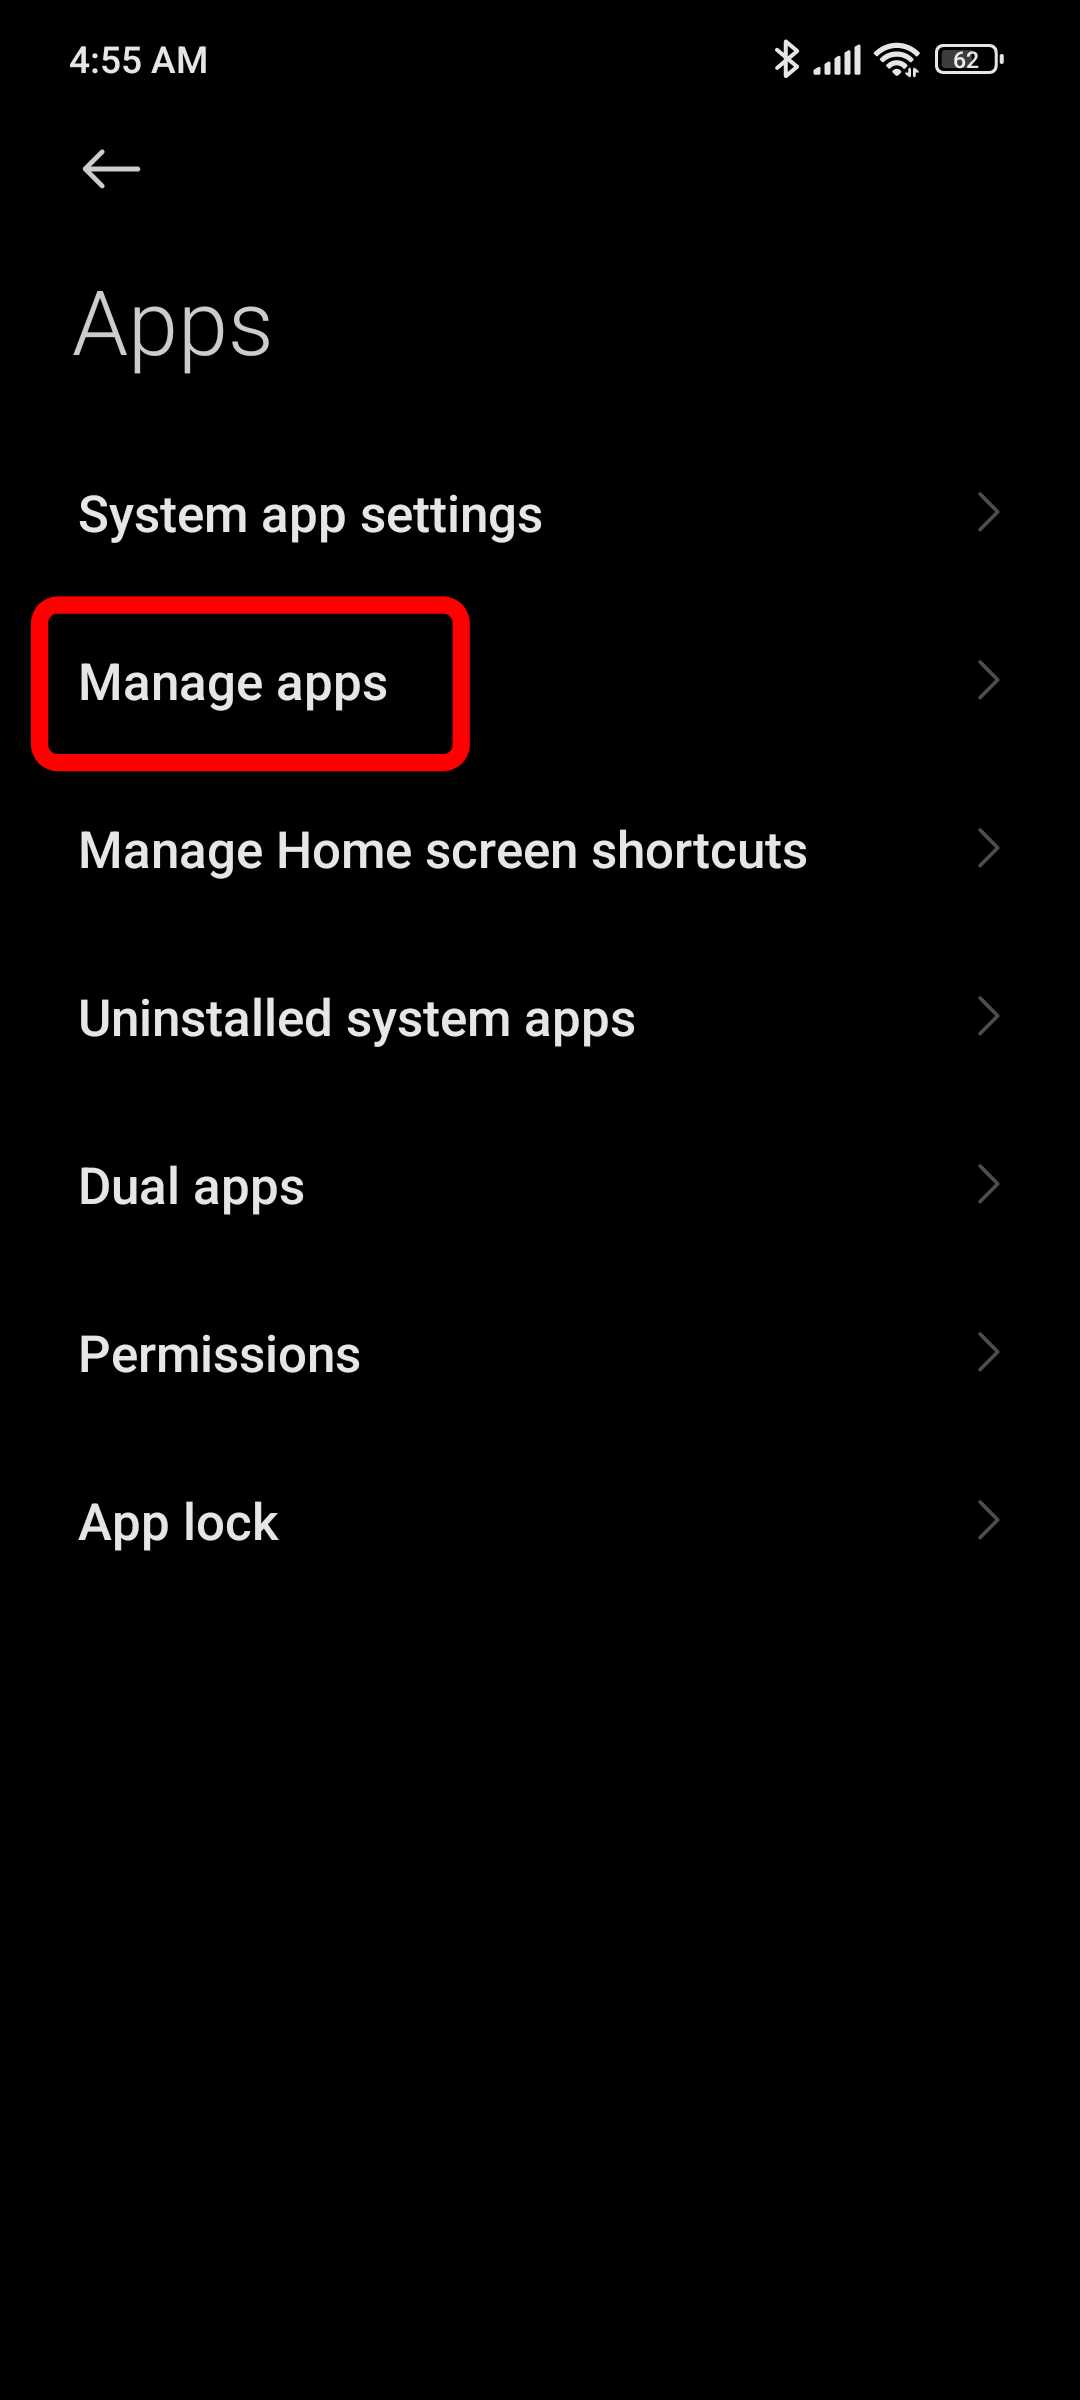 Go to Manage Apps